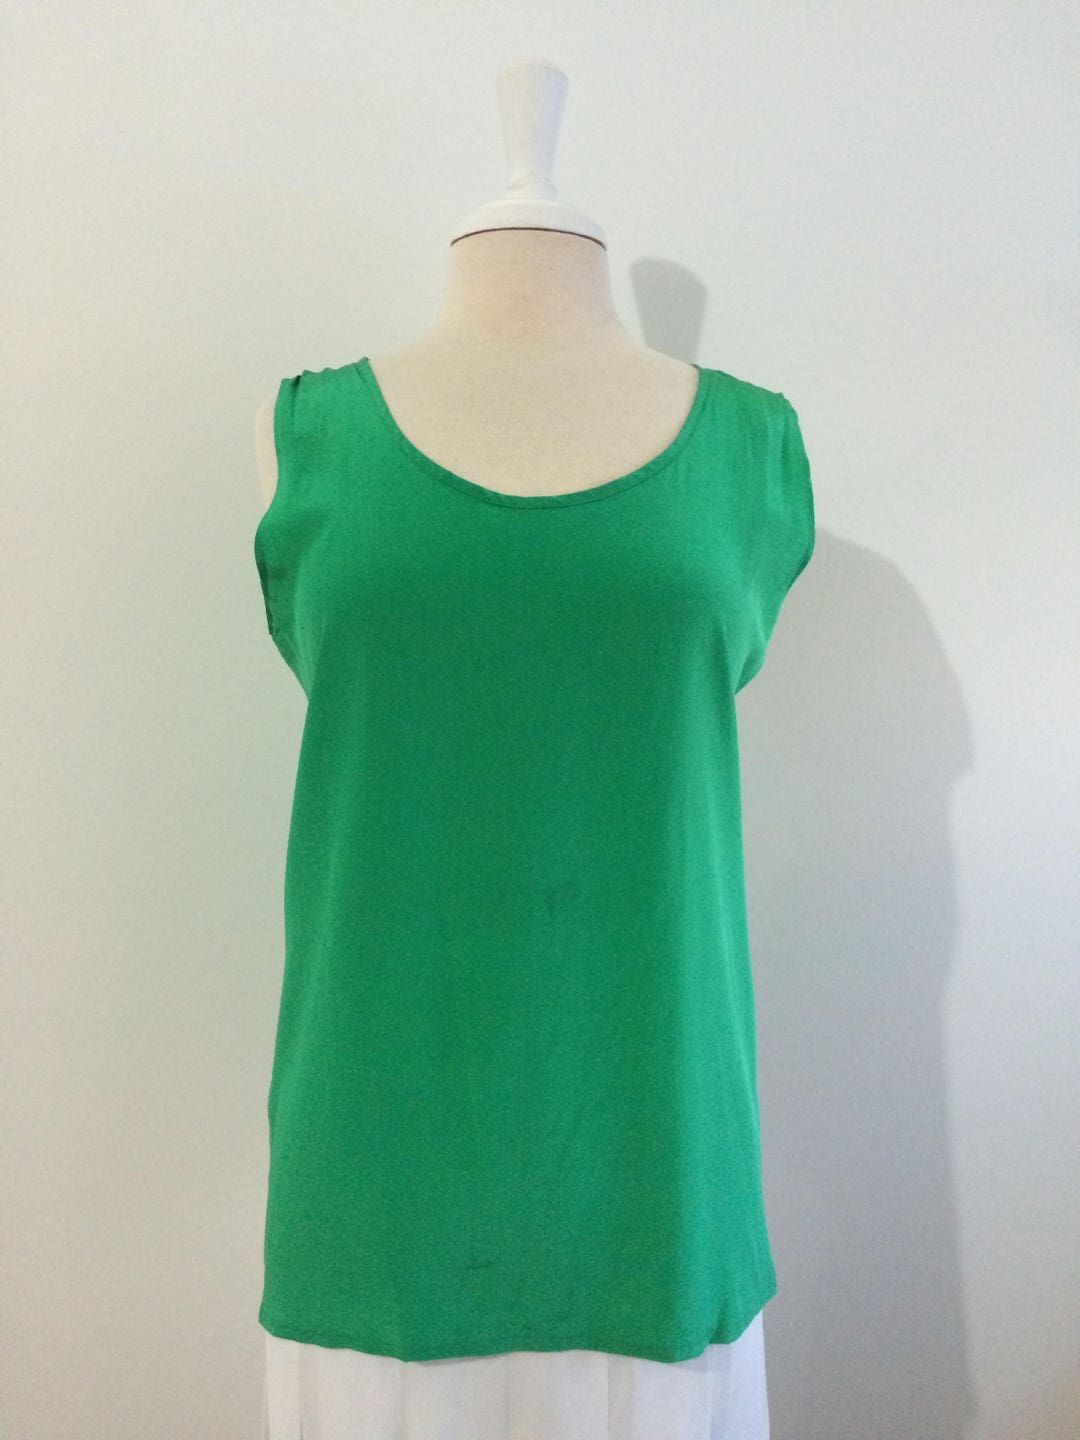 Vintage Silk Sleeveless Chartreuse/ Bright Green Top Size L - Etsy